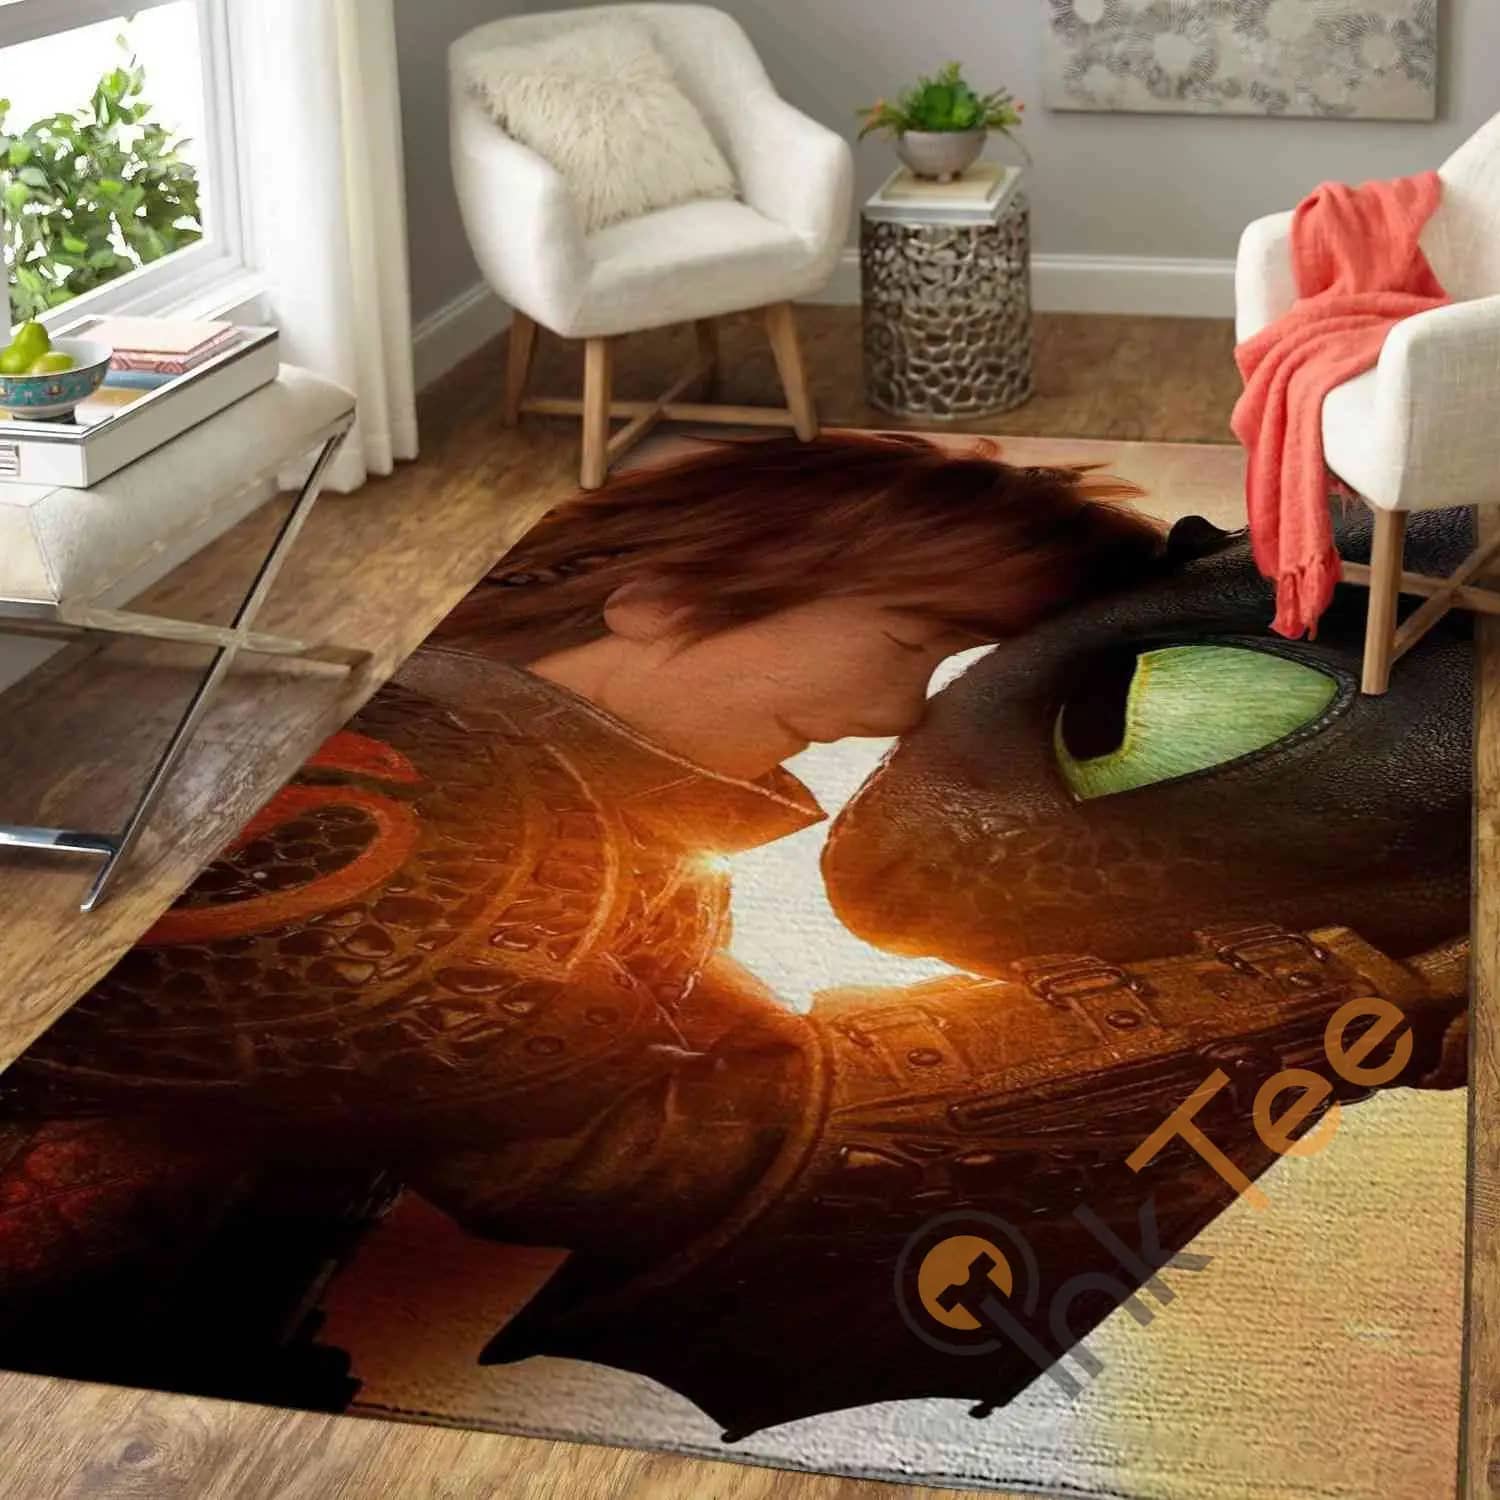 How To Train Your Dragon Area  Amazon Best Seller Sku 1009 Rug